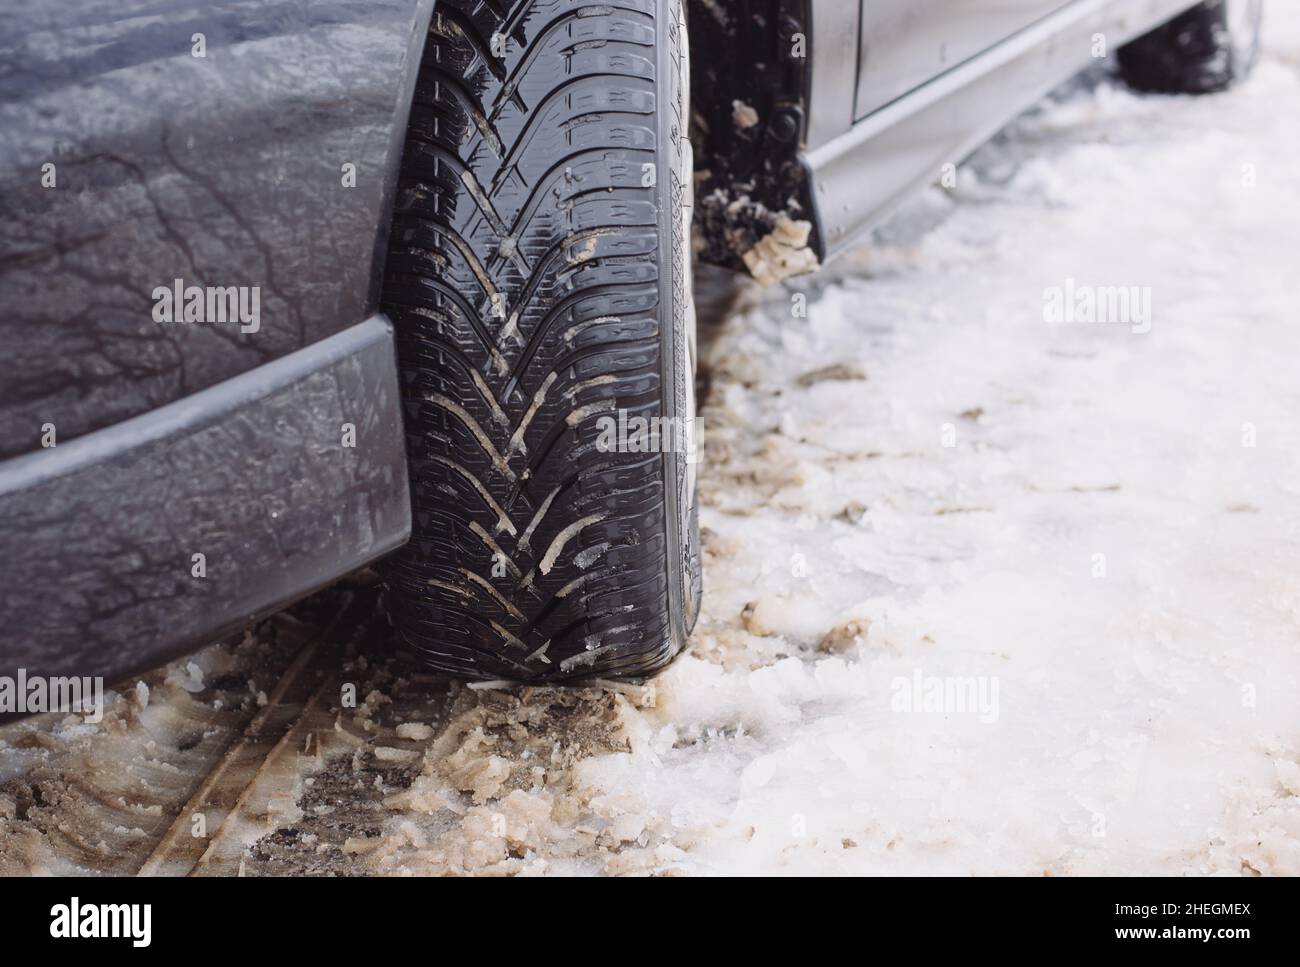 photography hi-res images and tires stock High - Alamy profile